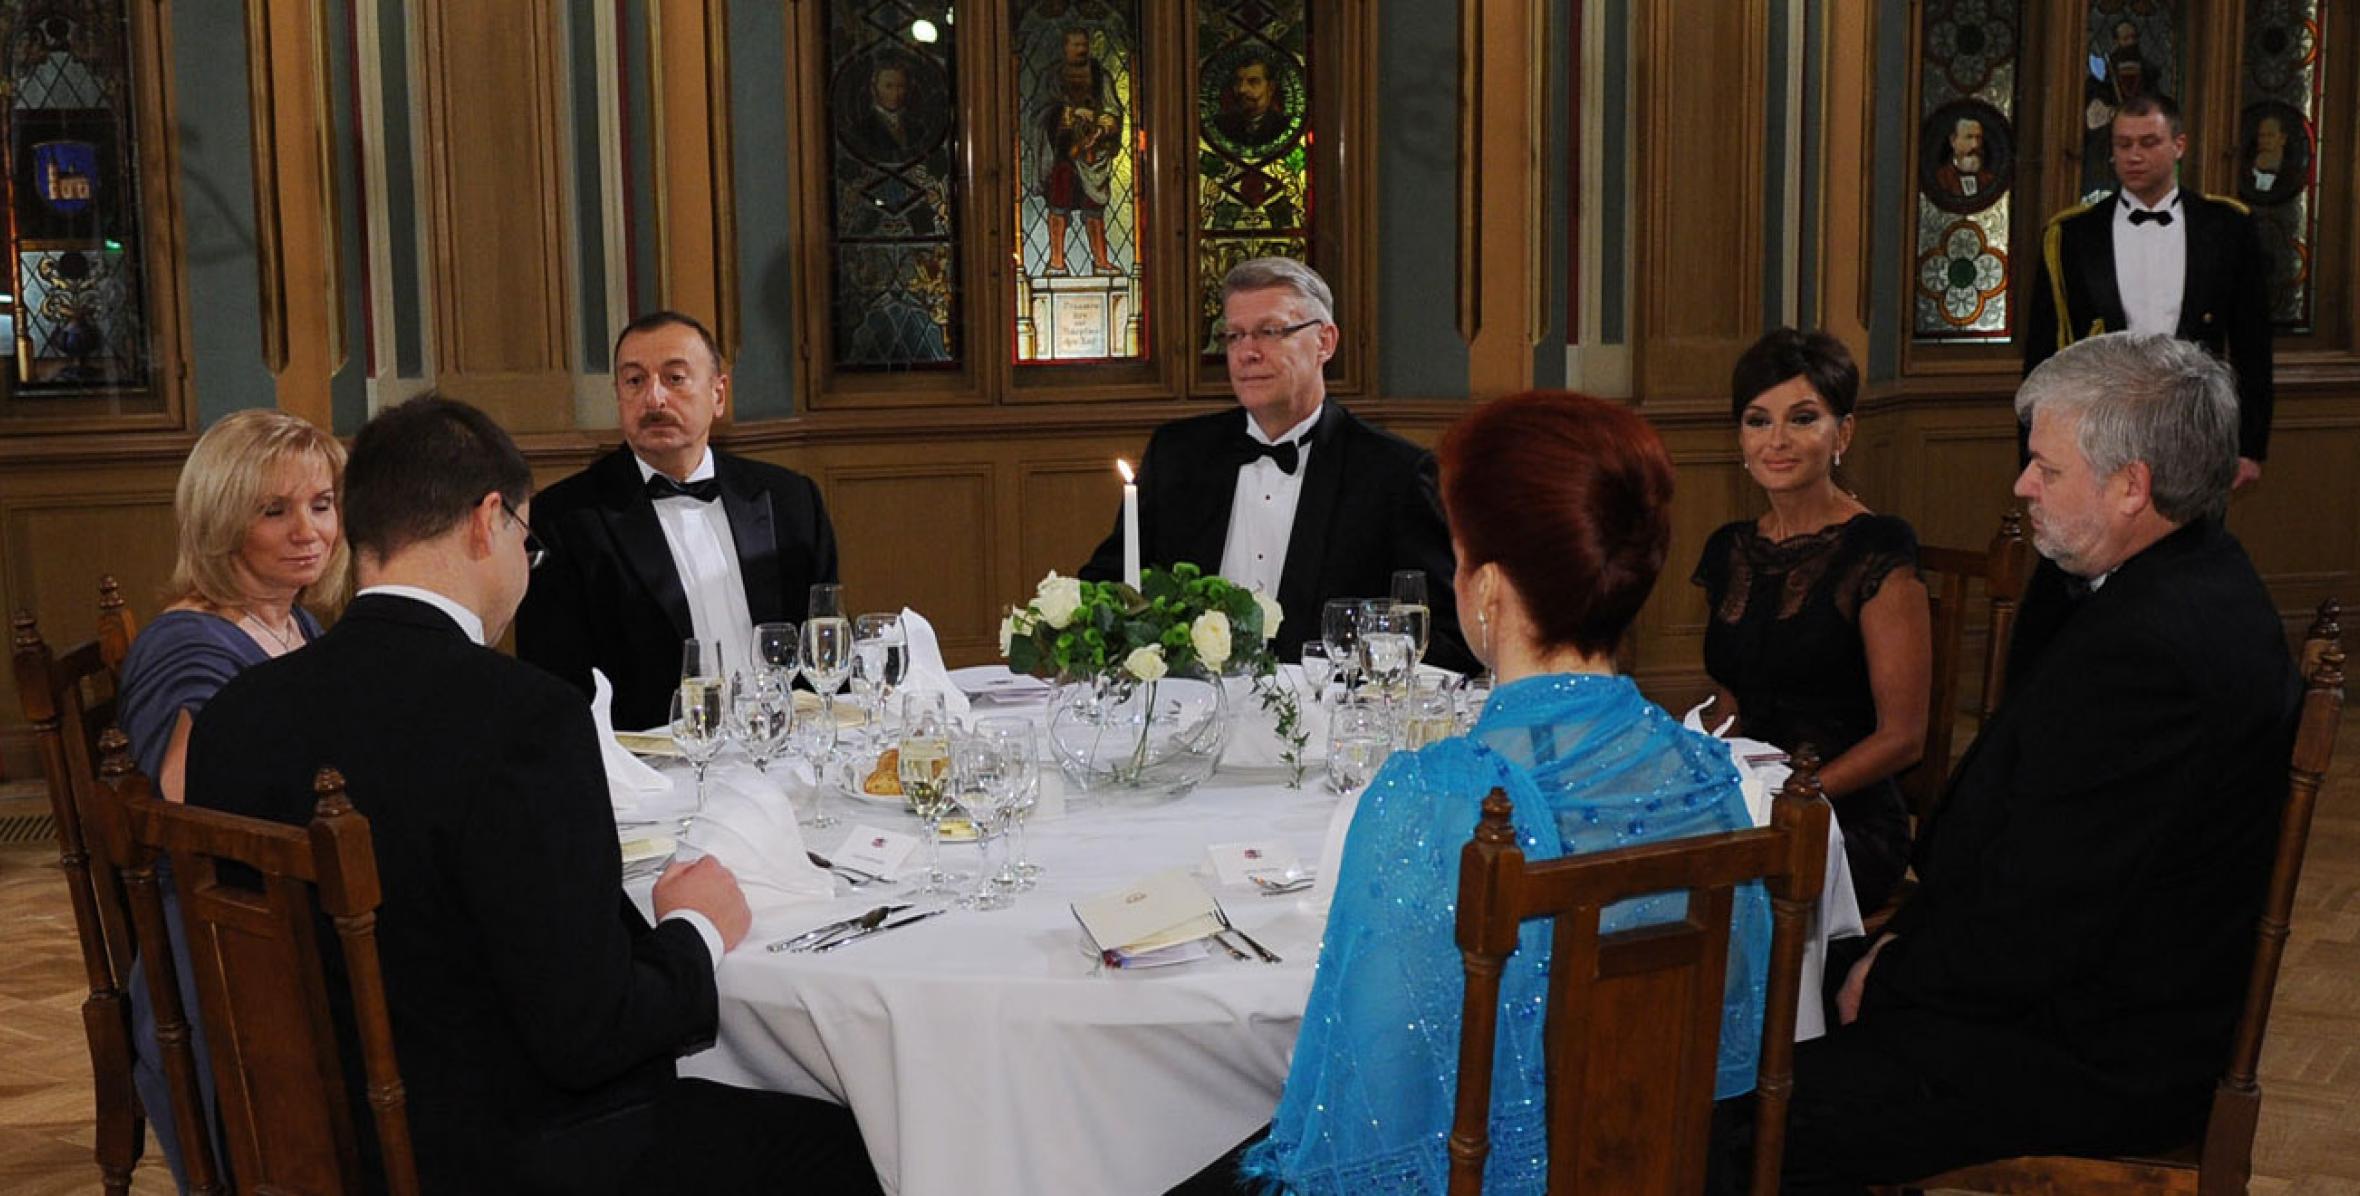 Official dinner reception was hosted in honor of Ilham Aliyev